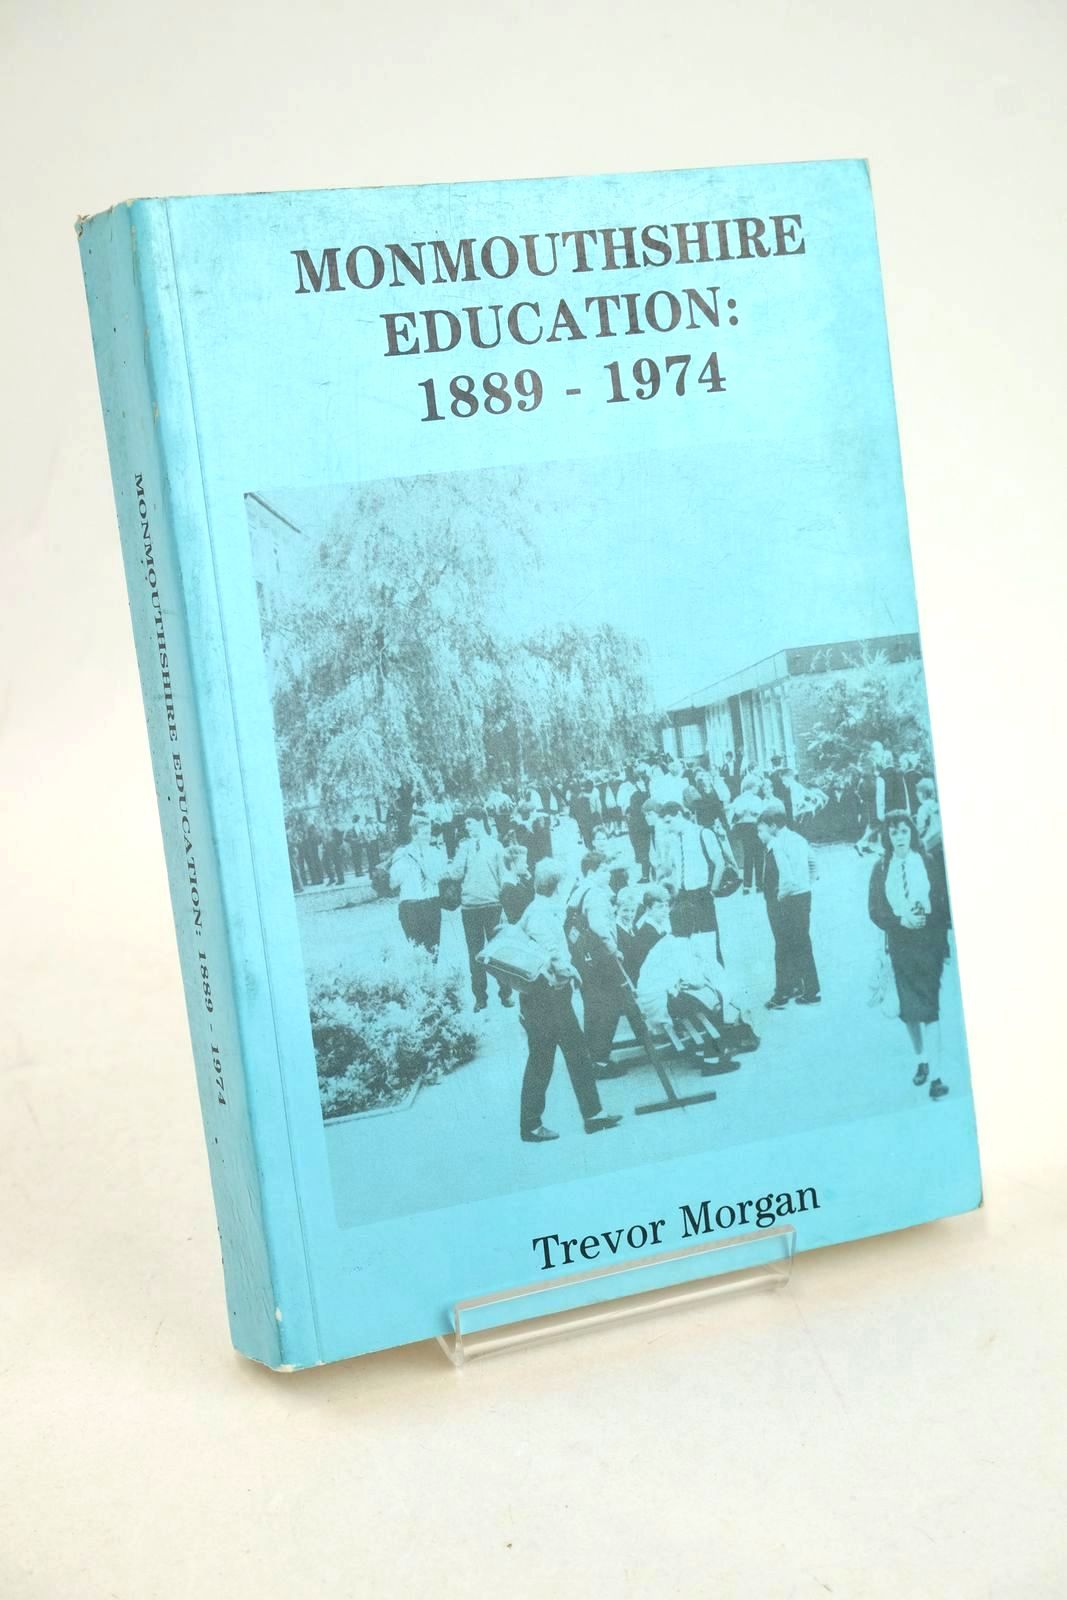 Photo of MONMOUTHSHIRE EDUCATION: 1889 - 1974 written by Morgan, Trevor published by Cwmbran Community Press Ltd. (STOCK CODE: 1327842)  for sale by Stella & Rose's Books